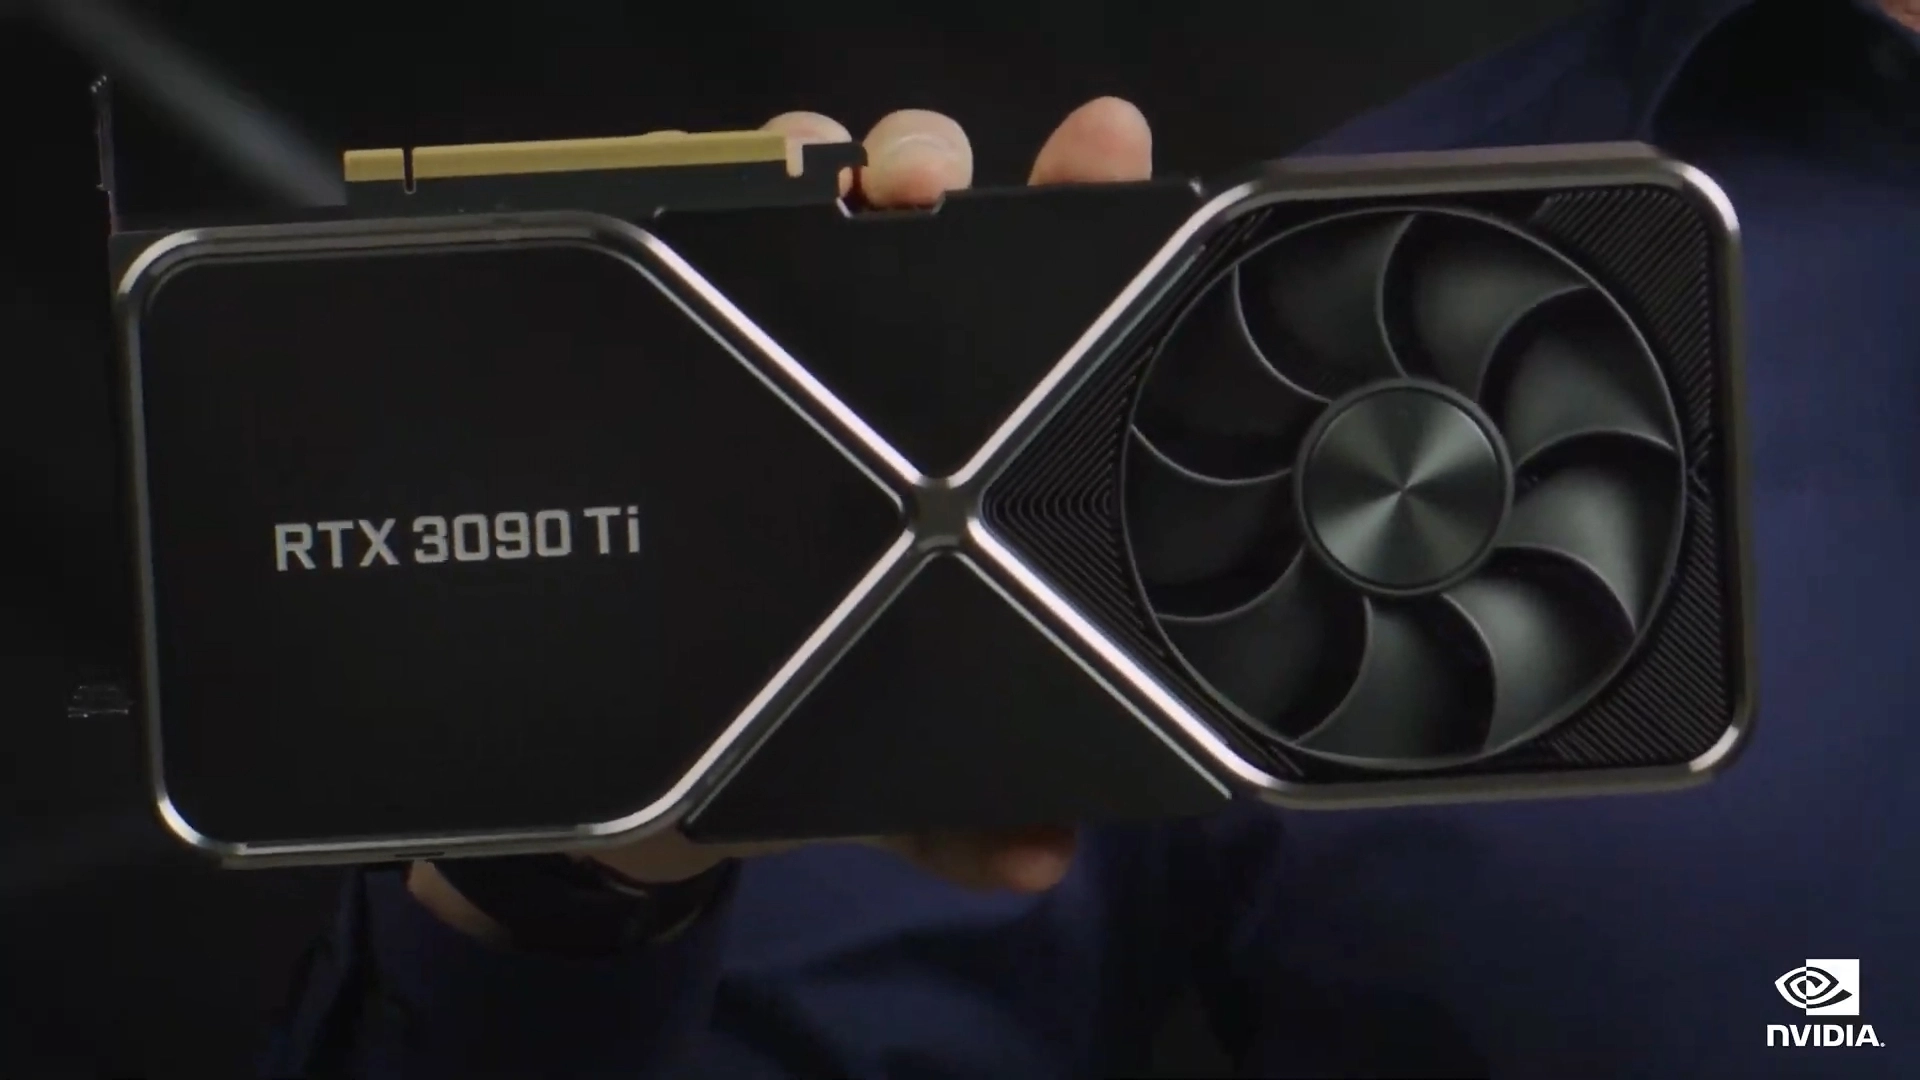 Nvidia Launches The RTX 3090 Ti Priced At $1,999+